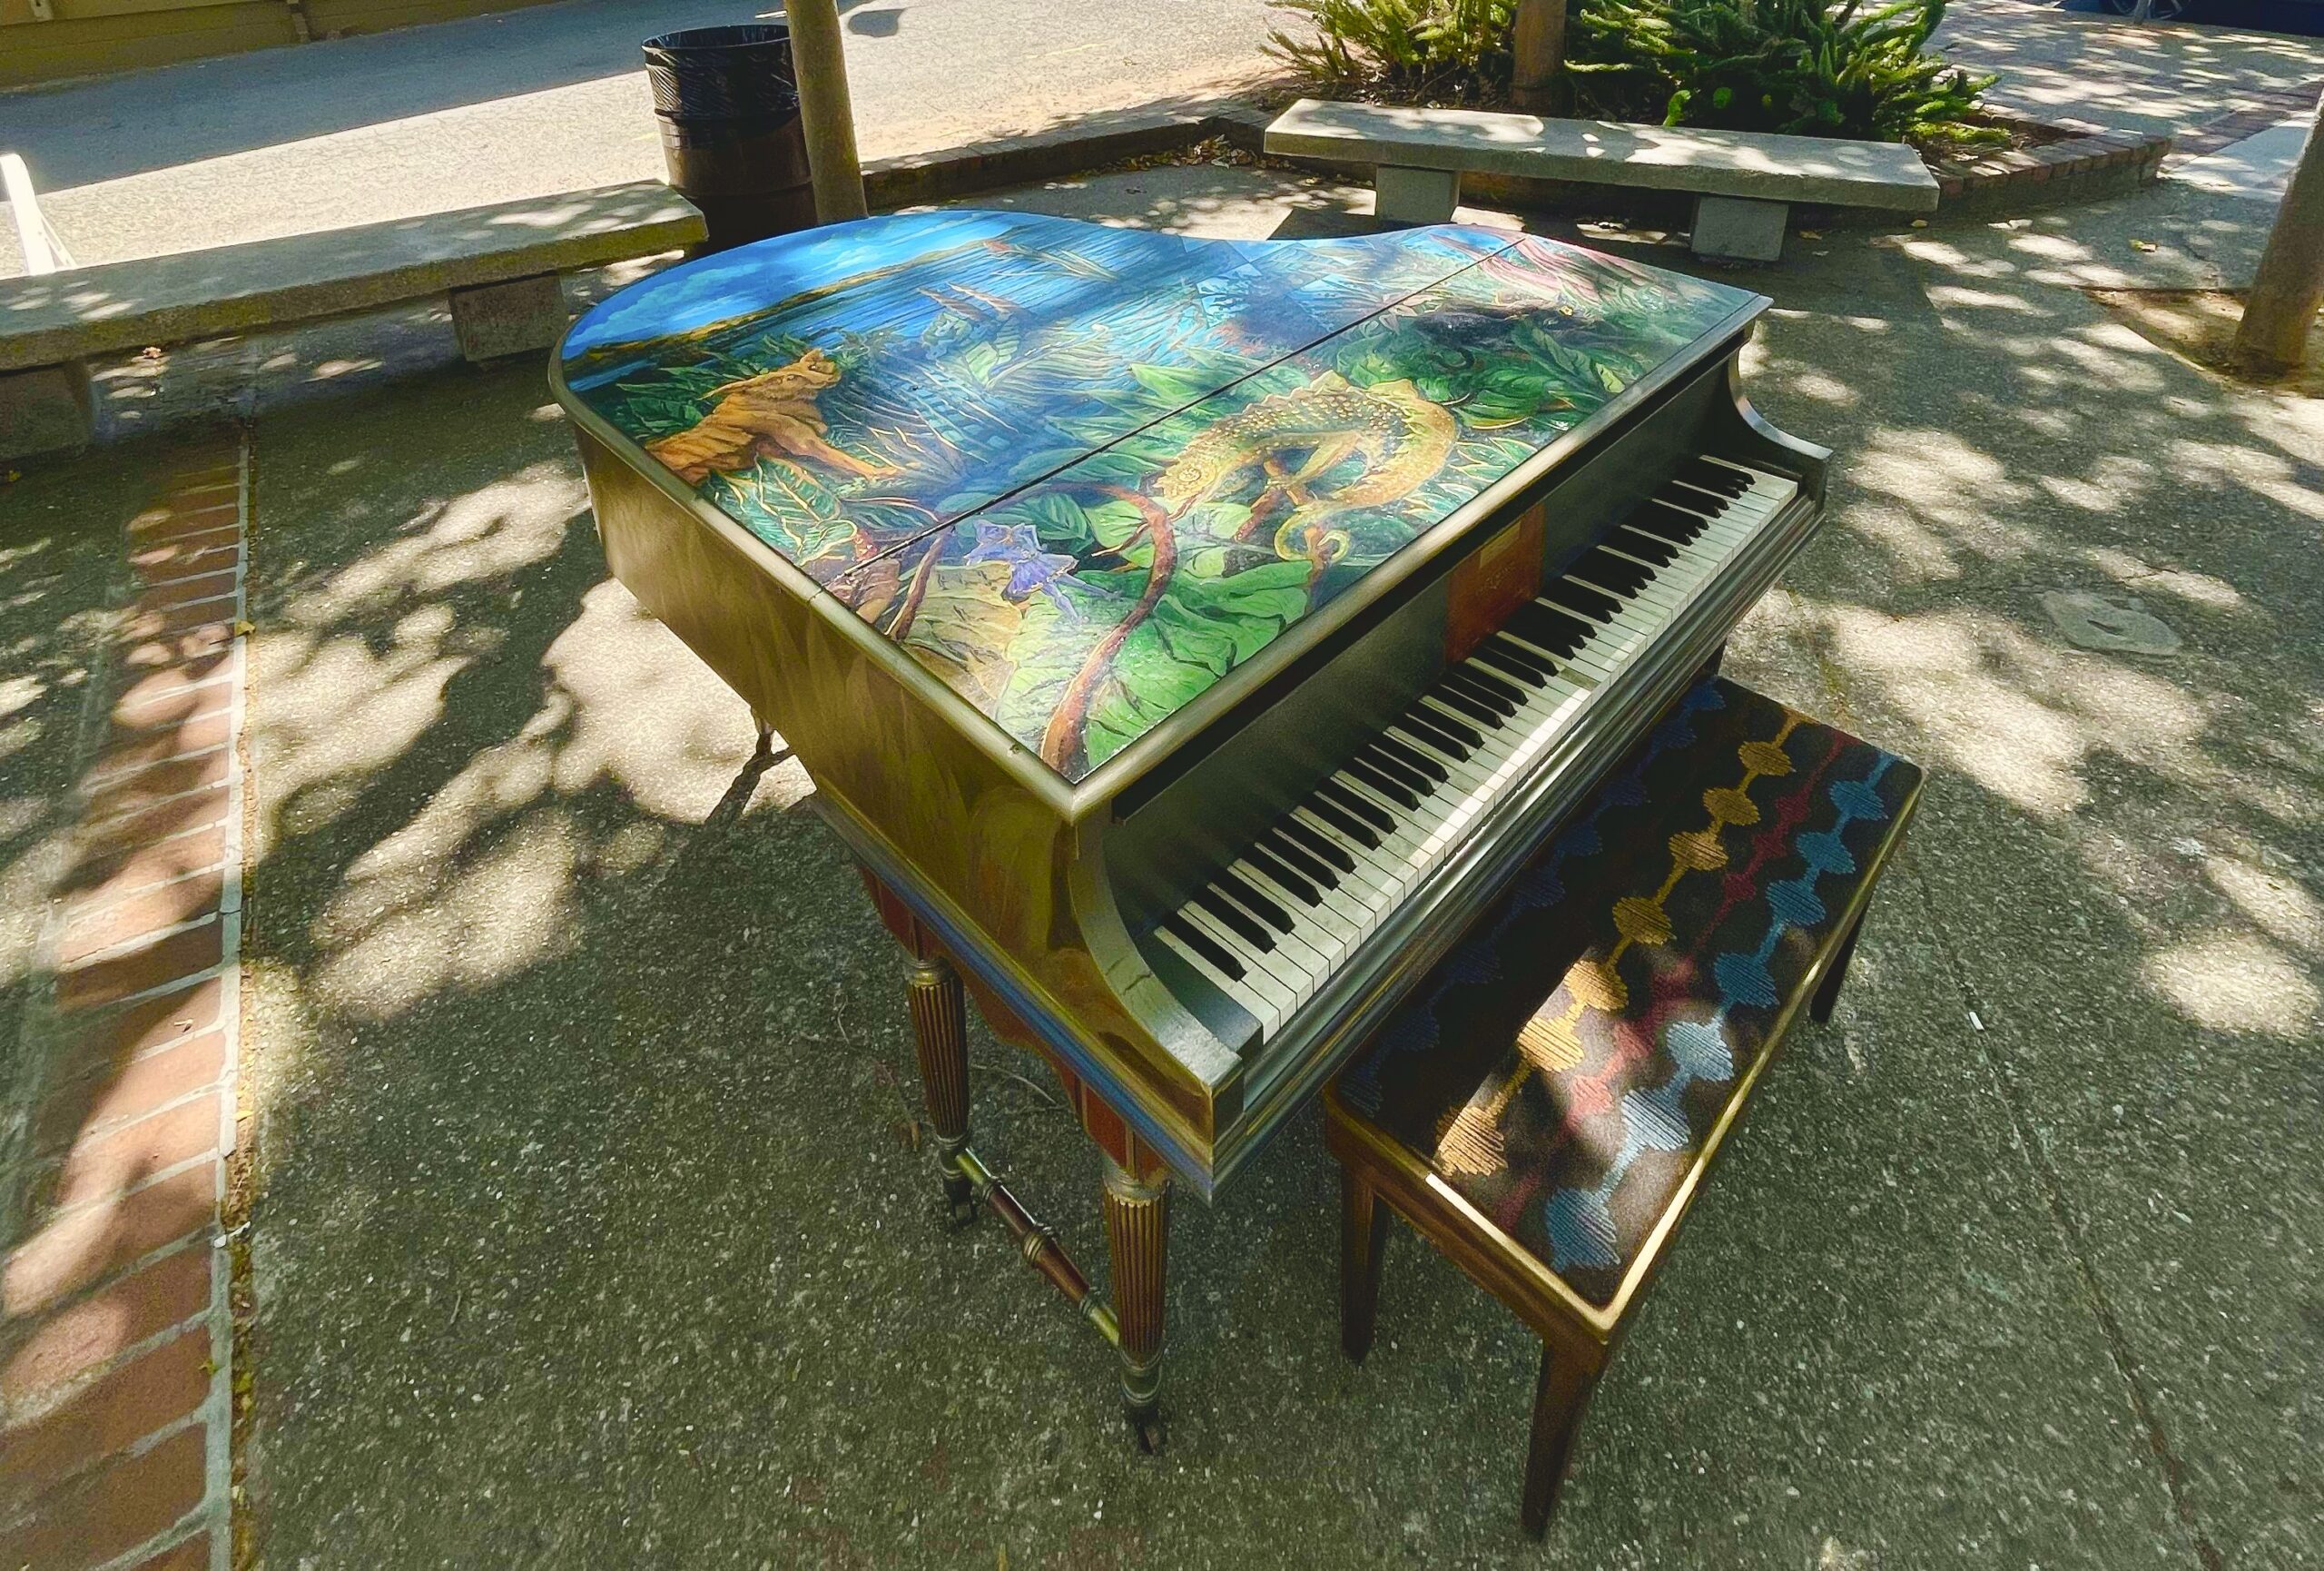 Youre invited! Arts and Culture Commission to dedicate new Play-Art piano on Saturday, July 22 The Benicia Independent ~ Eyes on the Environment / Benicia news and views